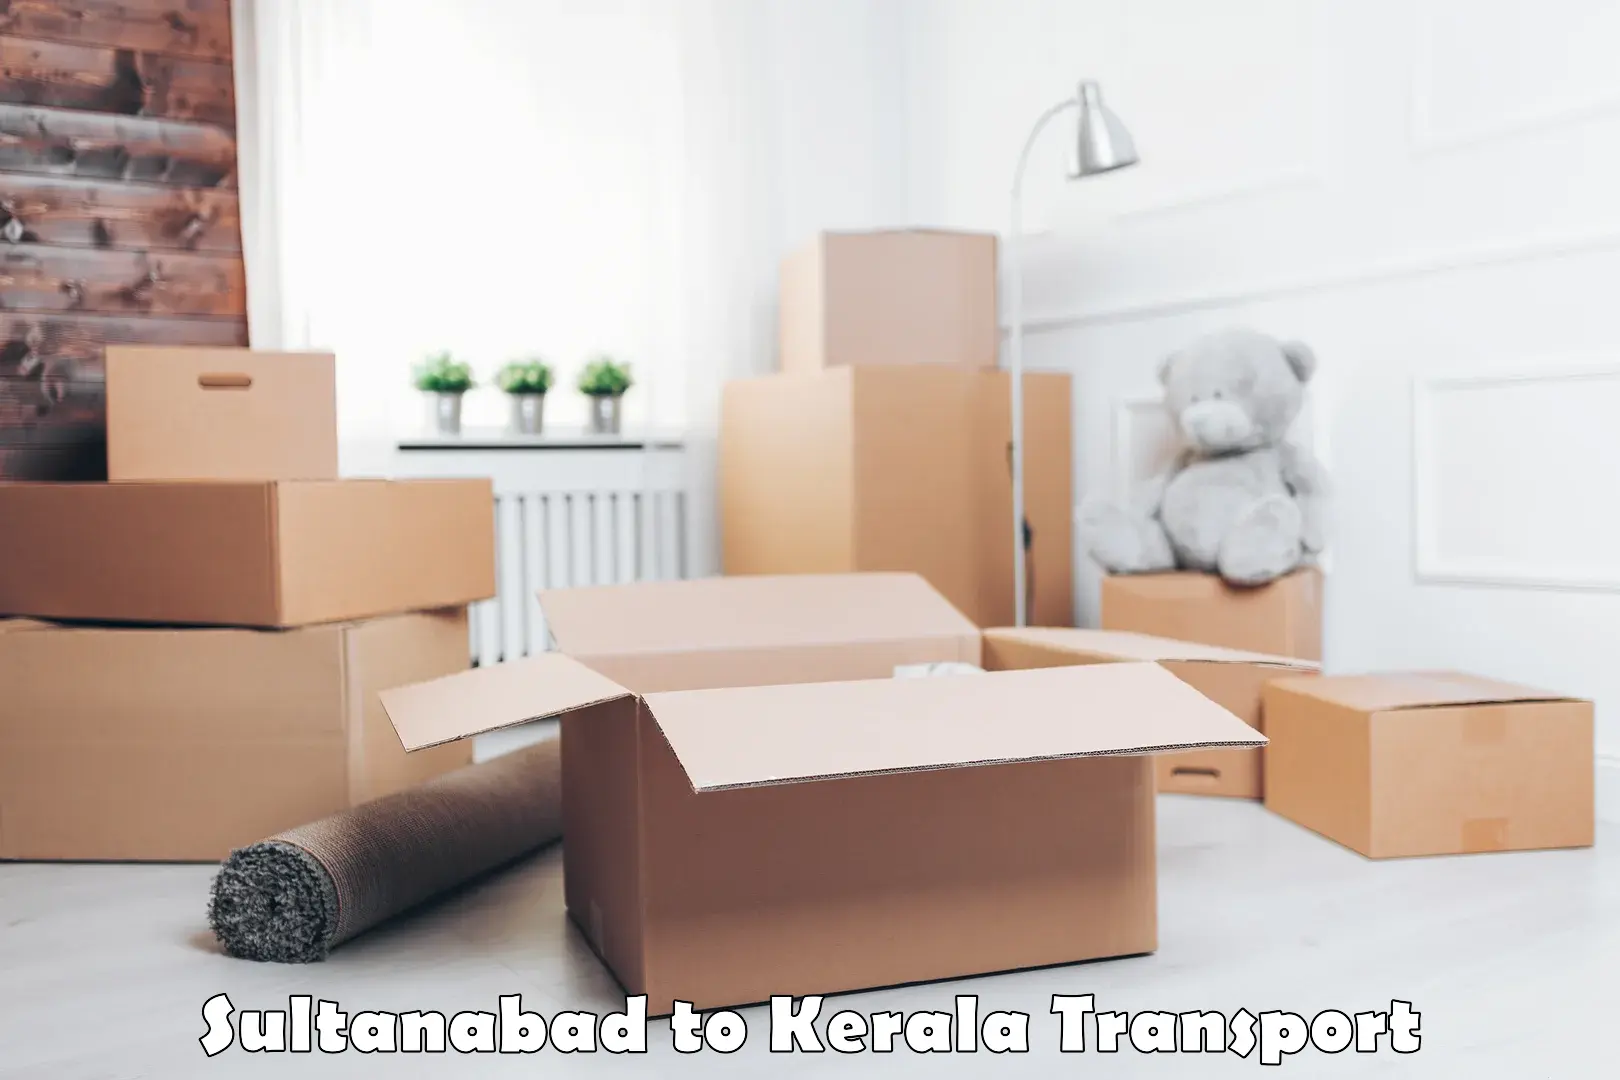 Cargo transportation services in Sultanabad to Panthalam